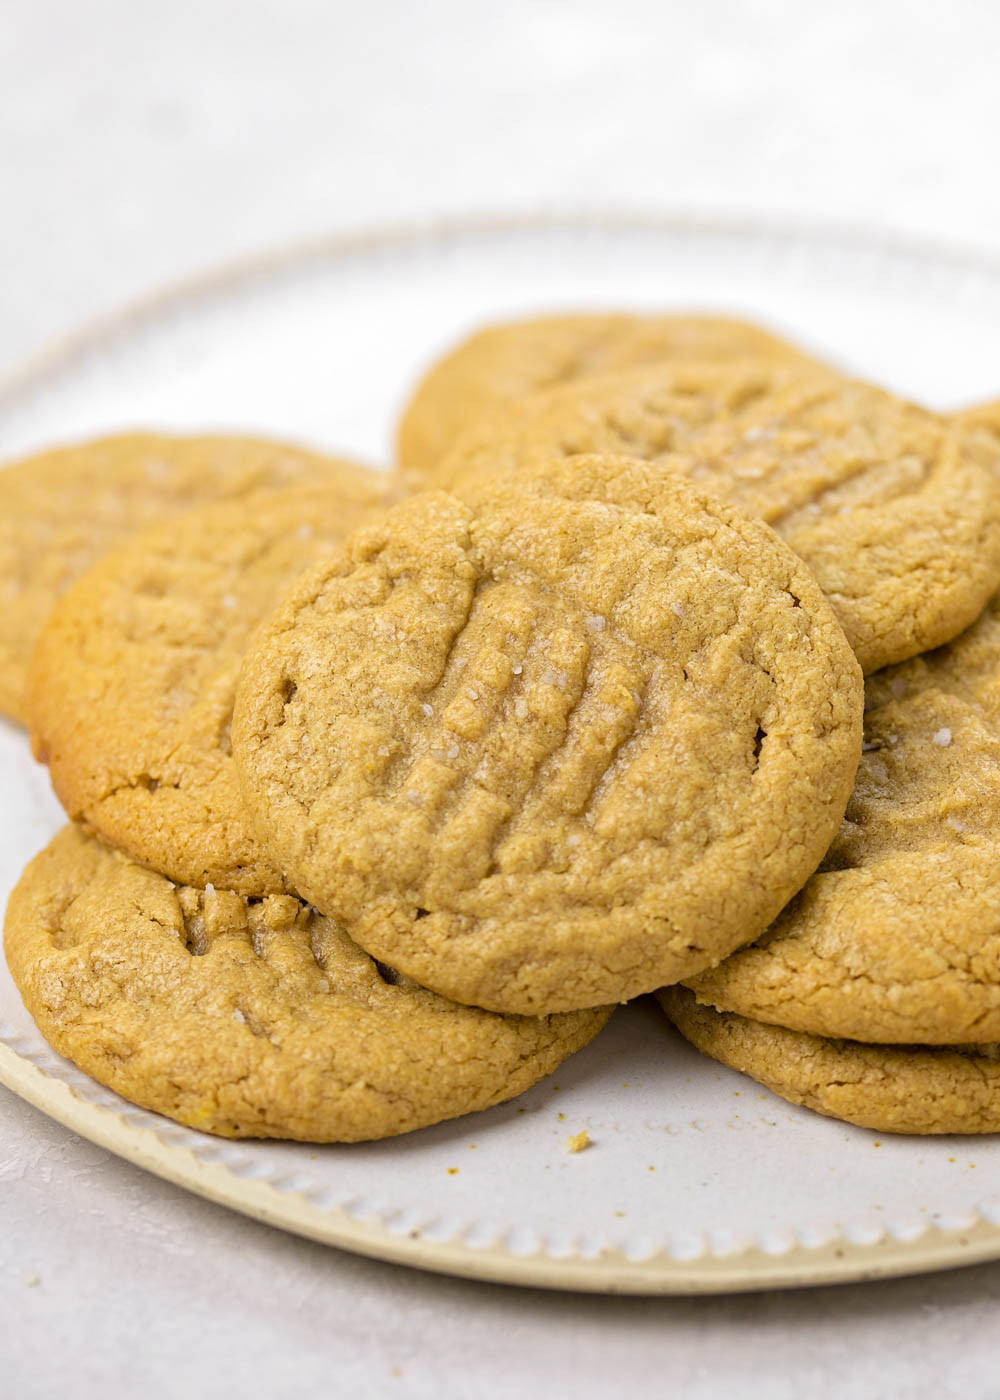 Peanut butter Cookies Simple Lovely 5 Ingre Nt Peanut butter Cookies